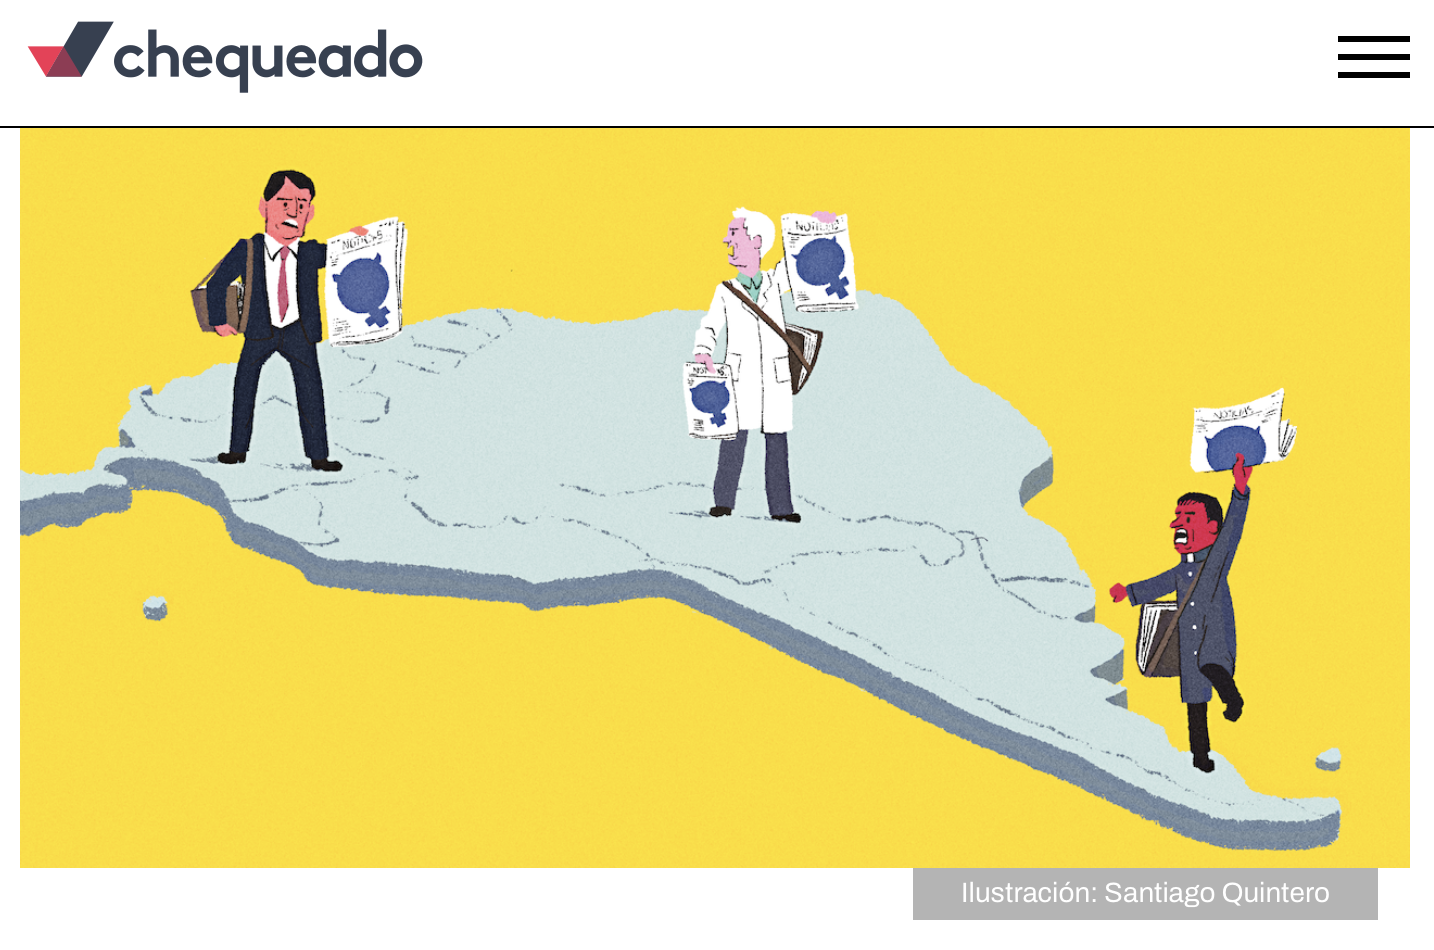 Screenshot of Argentinian media outlet Chequeado's illustration.